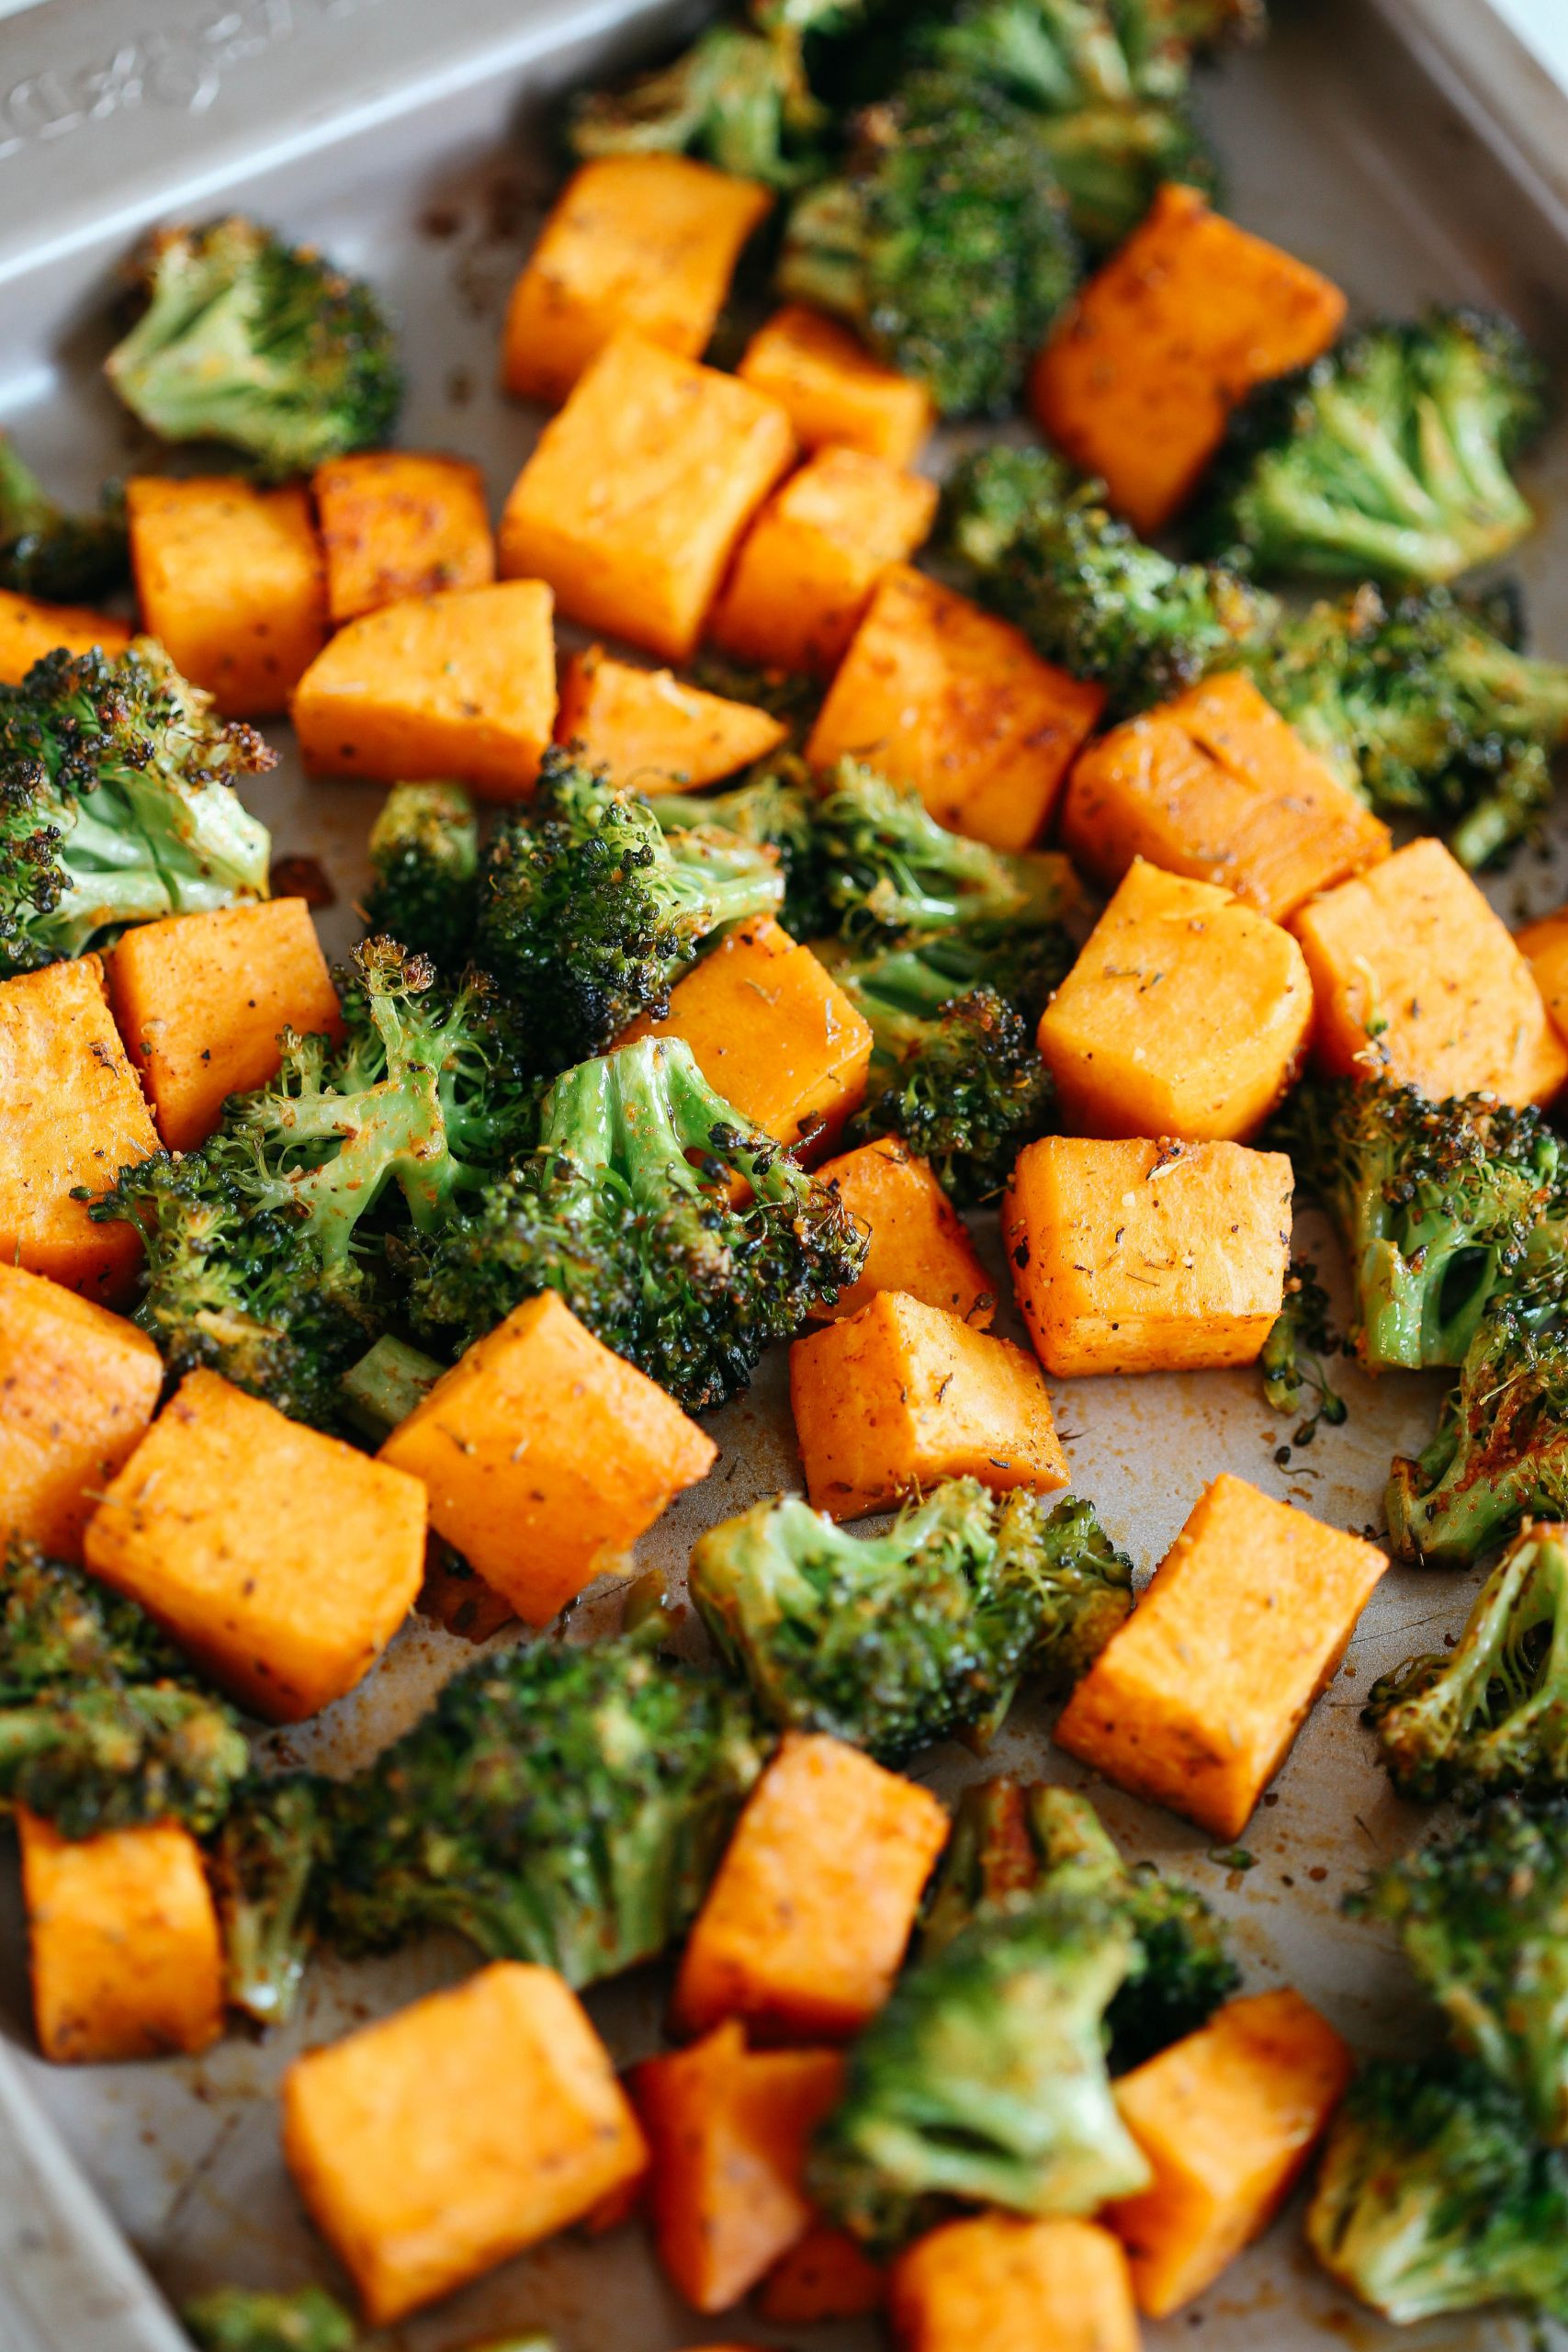 Healthy Side Dishes For Dinner
 Perfectly Roasted Broccoli & Sweet Potatoes Eat Yourself